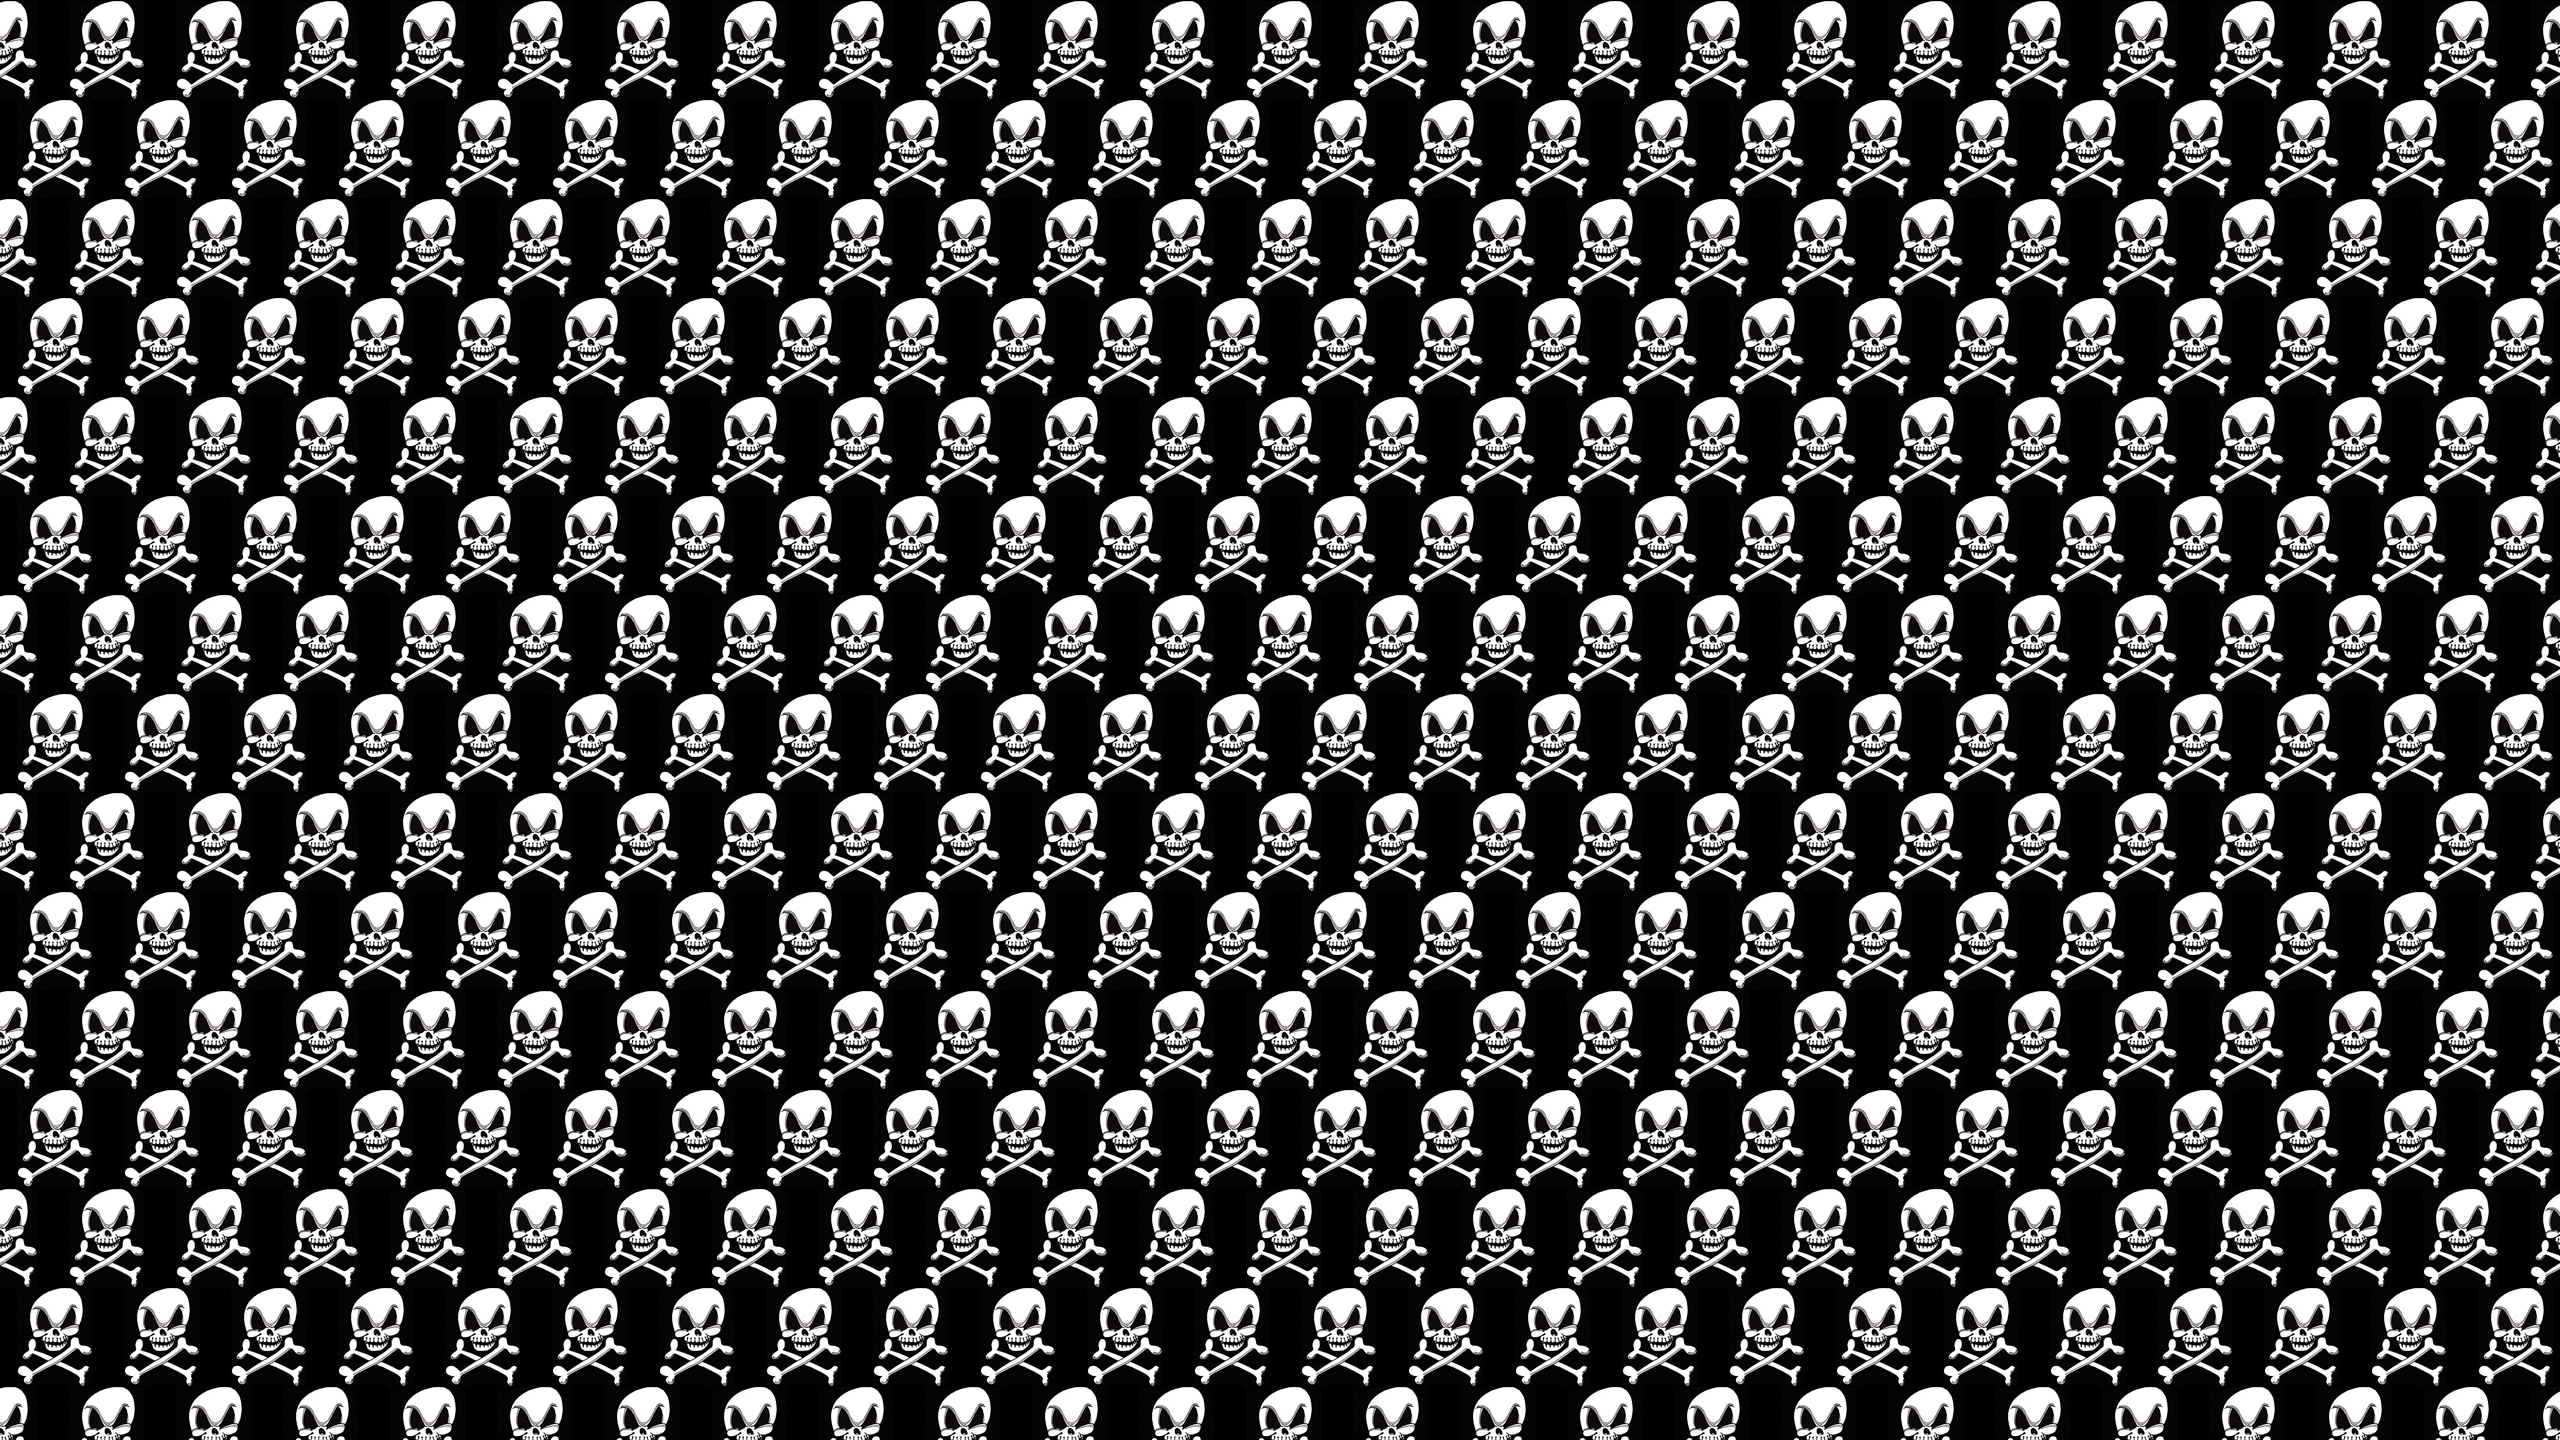 Skulls 4K wallpaper for your desktop or mobile screen free and easy to download